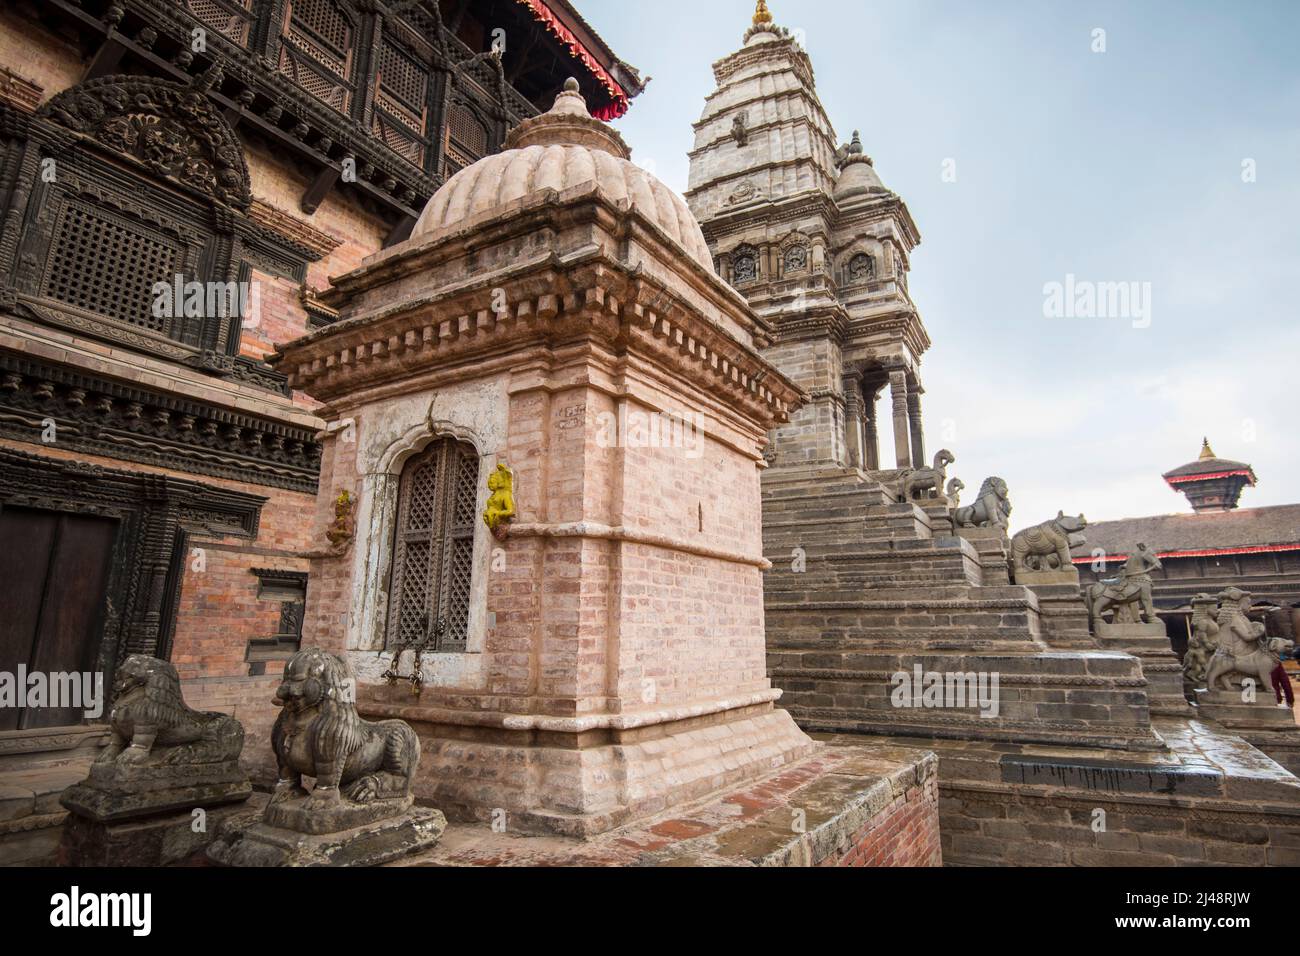 Kathmandu,Nepal- March 20,2022 : Patan Durbar Square is situated at the centre of Lalitpur city. Patan is one of the oldest know Buddhist City. Stock Photo